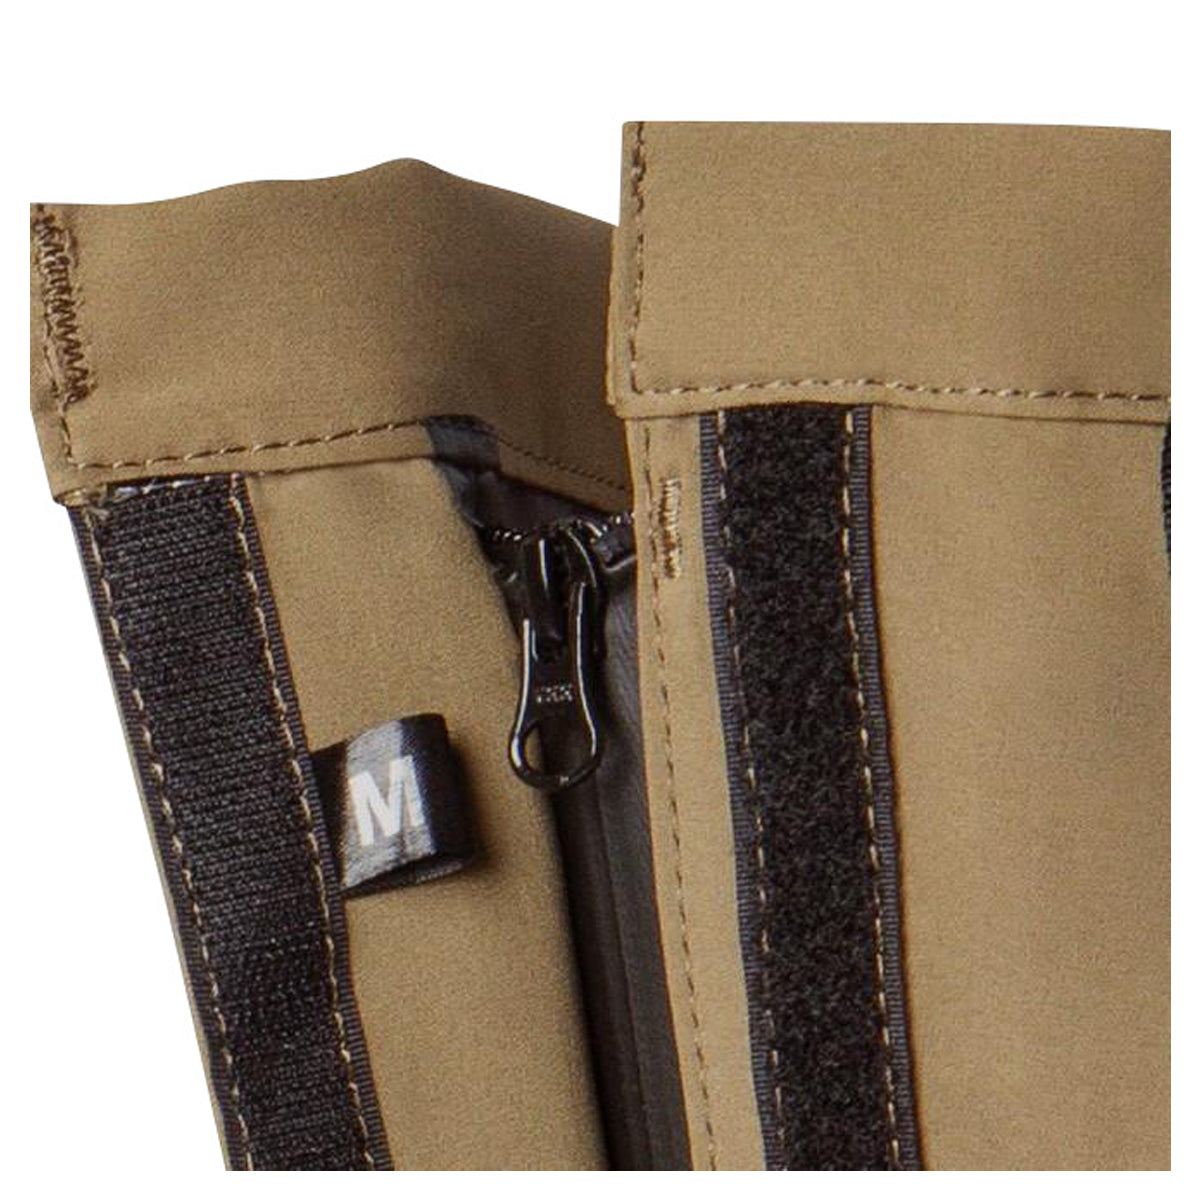 Outdoor Vision Ram River Gaiters